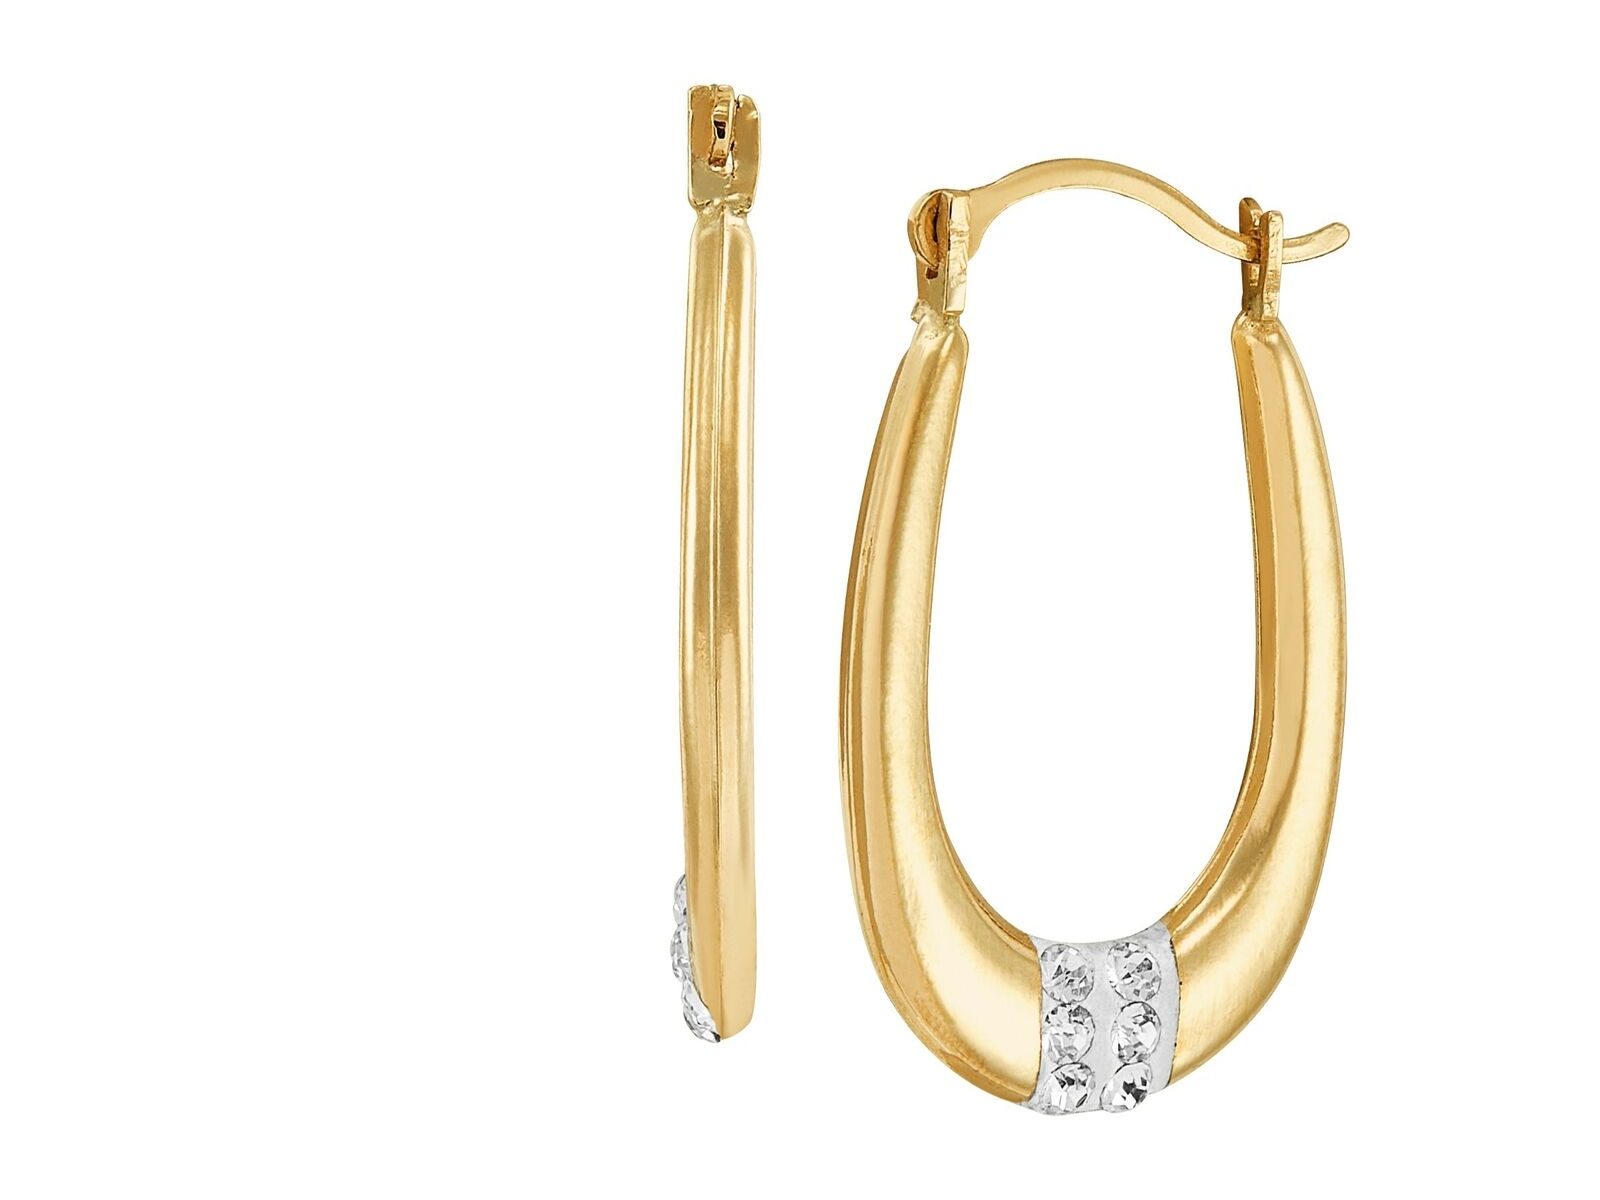 Oval Hoop Earrings with Crystals in 10K Gold